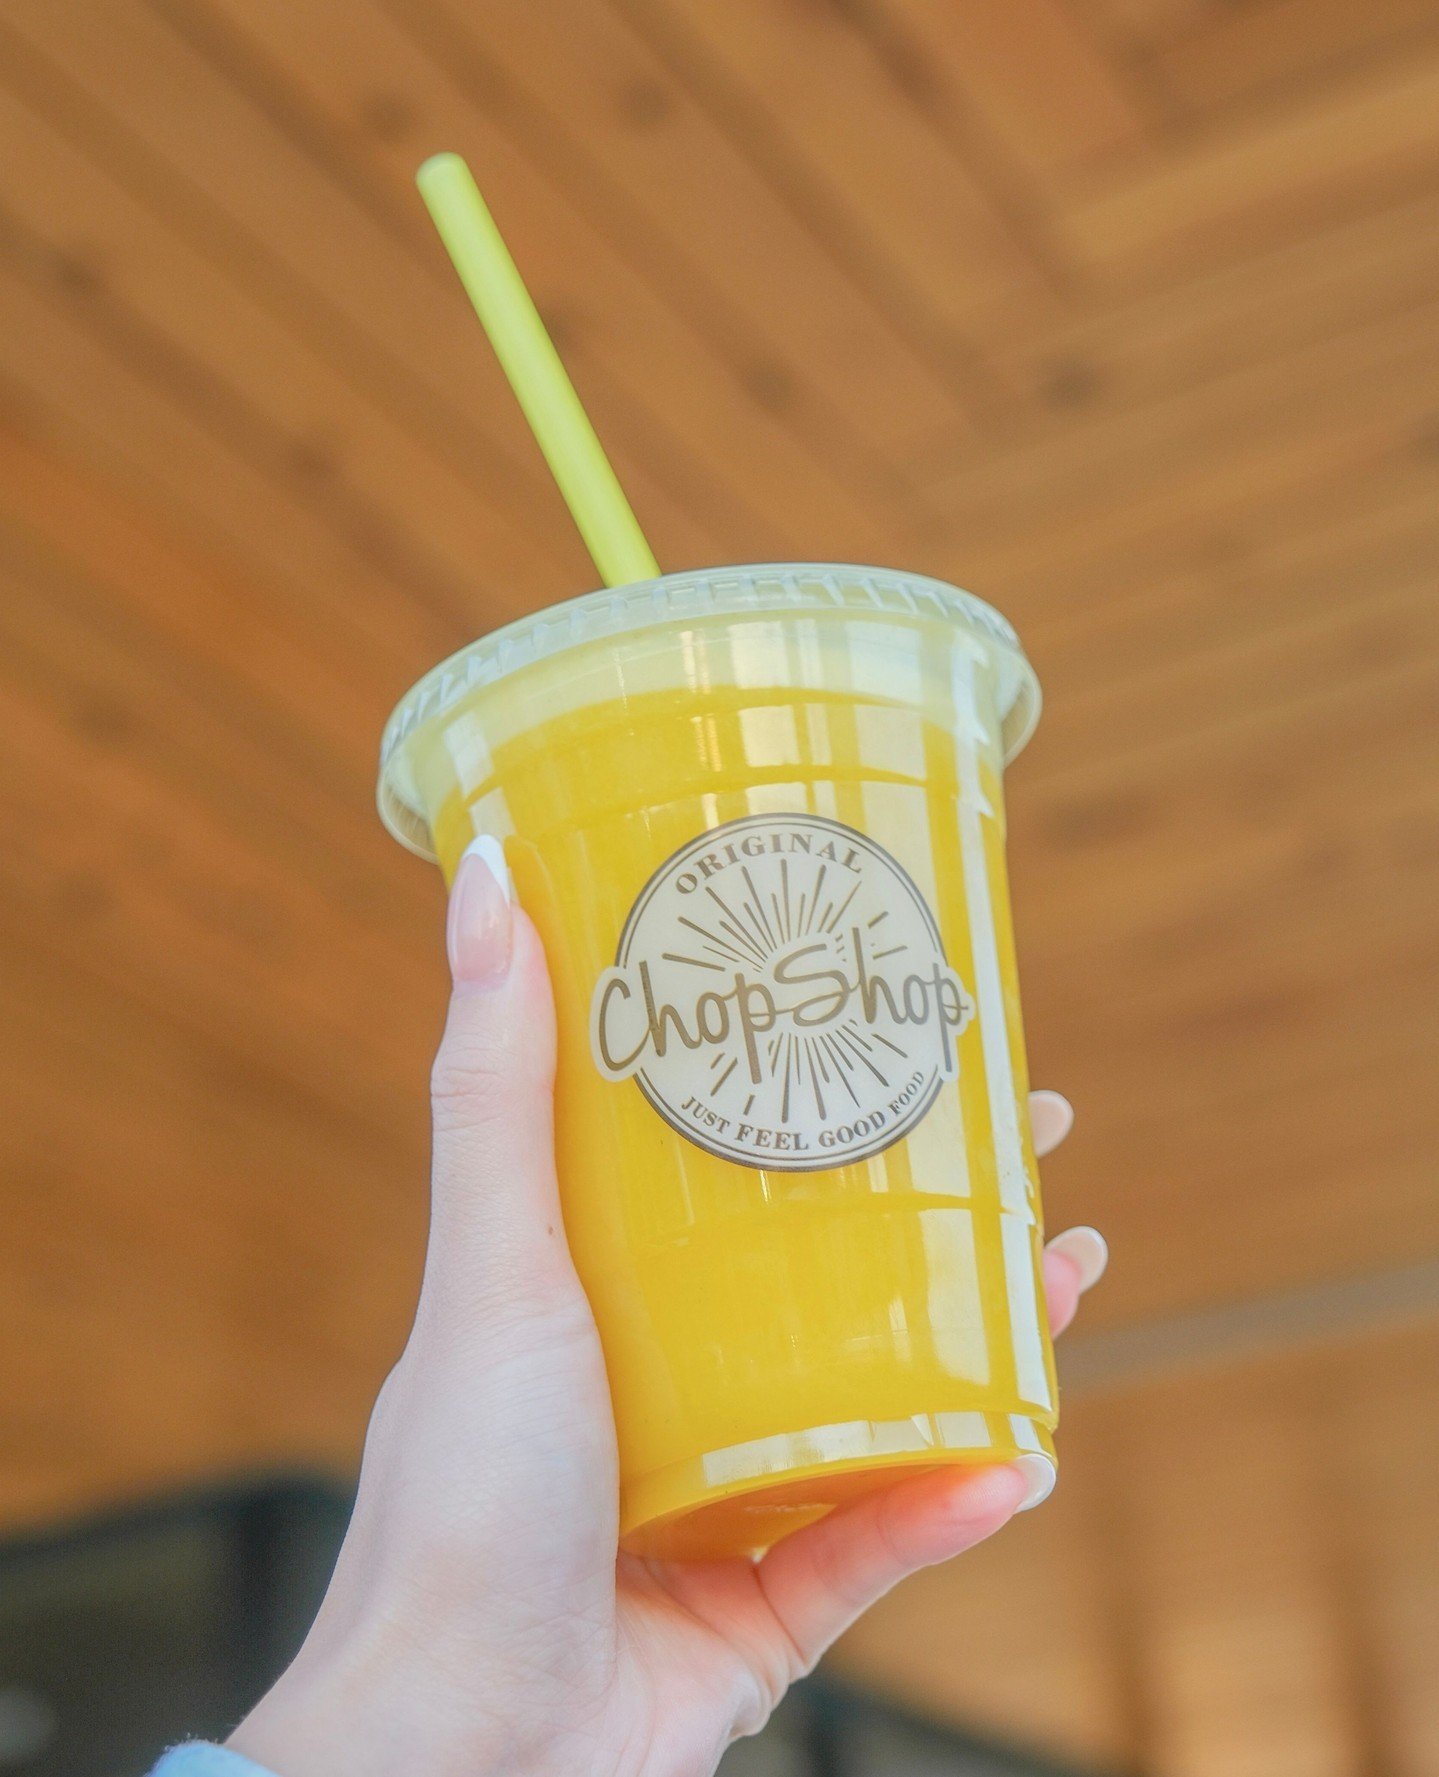 Now available at @originalchopshop. . . The Golden Heart ☀️ 💛 Enjoy a fresh-made juice as a midday pick me up!

What&rsquo;s in it?
🍍 Pineapple
🍠 Beet
🍊 Oranges
🍋 Lemon
🧂 Dash of salt

Download their app to receive daily rewards like $3 off any